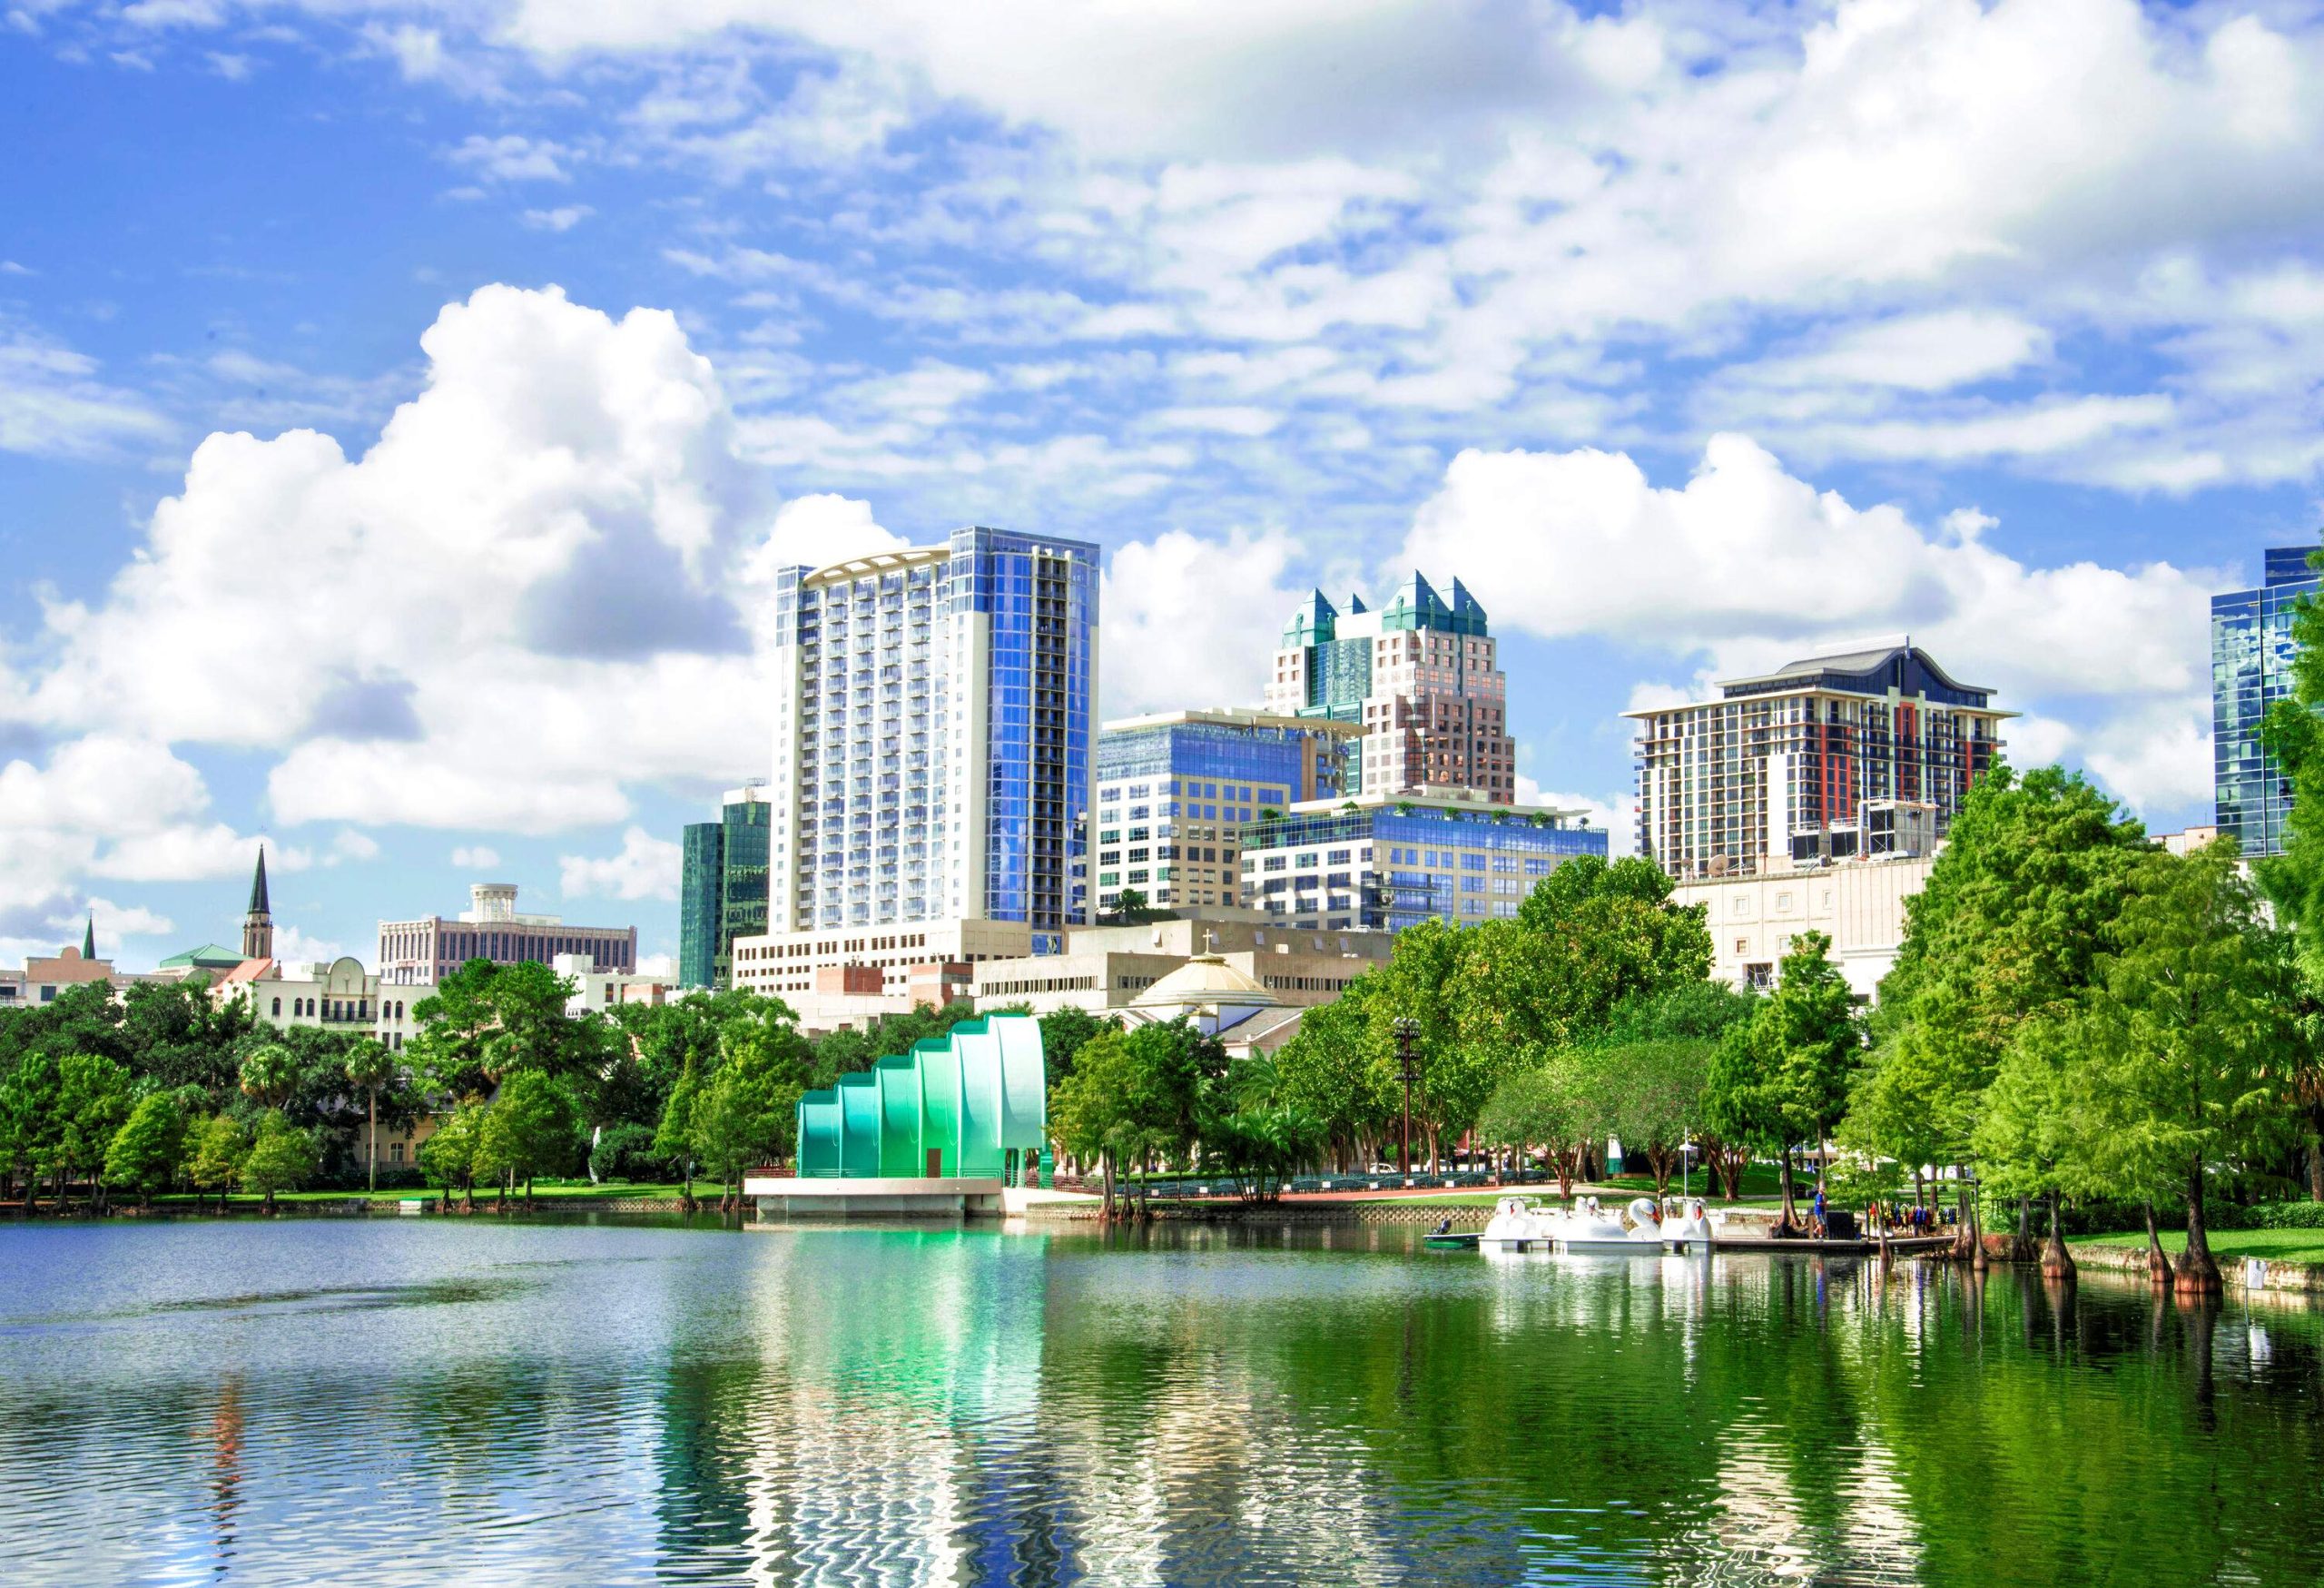 A tranquil lake lined with tall green trees with a view of modern urban cityscape against the cloudy blue sky.